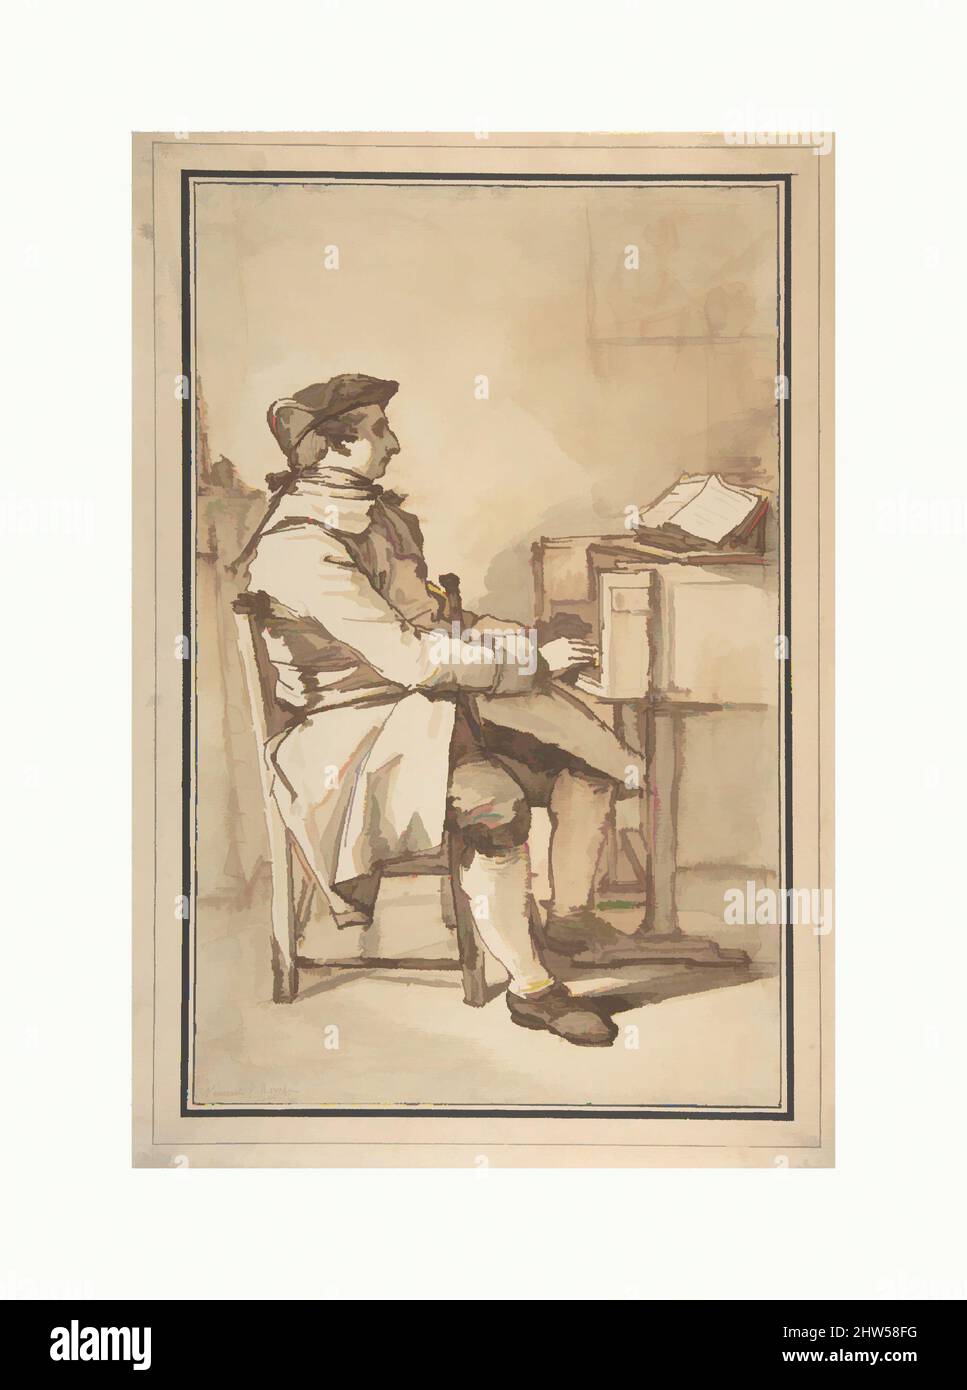 Art inspired by Man Seated at a Keyboard Instrument, 1774, Pen and brown ink, brush and brown wash, 12 11/16 x 8 1/8 in. (32.3 x 20.5 cm), Drawings, François André Vincent (French, Paris 1746–1816 Paris, Classic works modernized by Artotop with a splash of modernity. Shapes, color and value, eye-catching visual impact on art. Emotions through freedom of artworks in a contemporary way. A timeless message pursuing a wildly creative new direction. Artists turning to the digital medium and creating the Artotop NFT Stock Photo